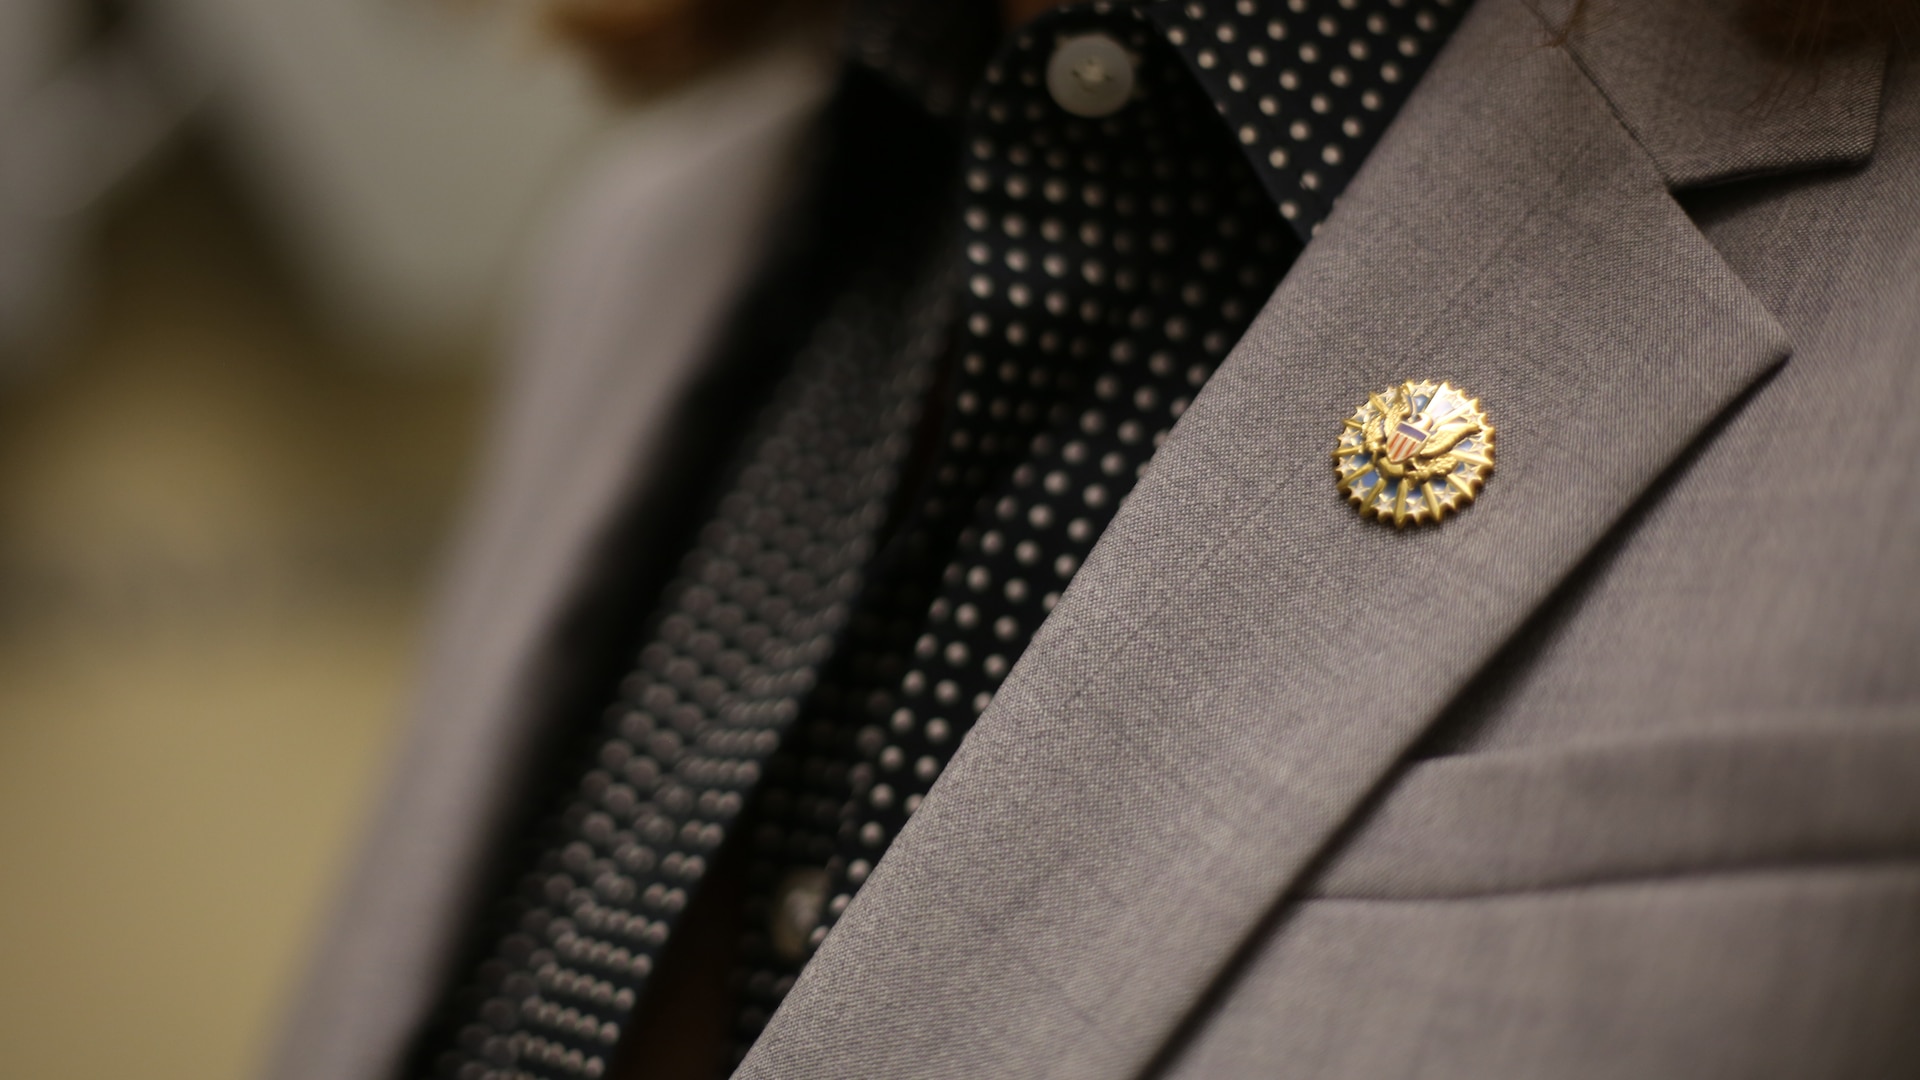 Civilian personnel of the Defense Contract Management Agency are now able to purchase and wear the new organization badge and lapel pin. (DCMA photo by Elizabeth Szoke)